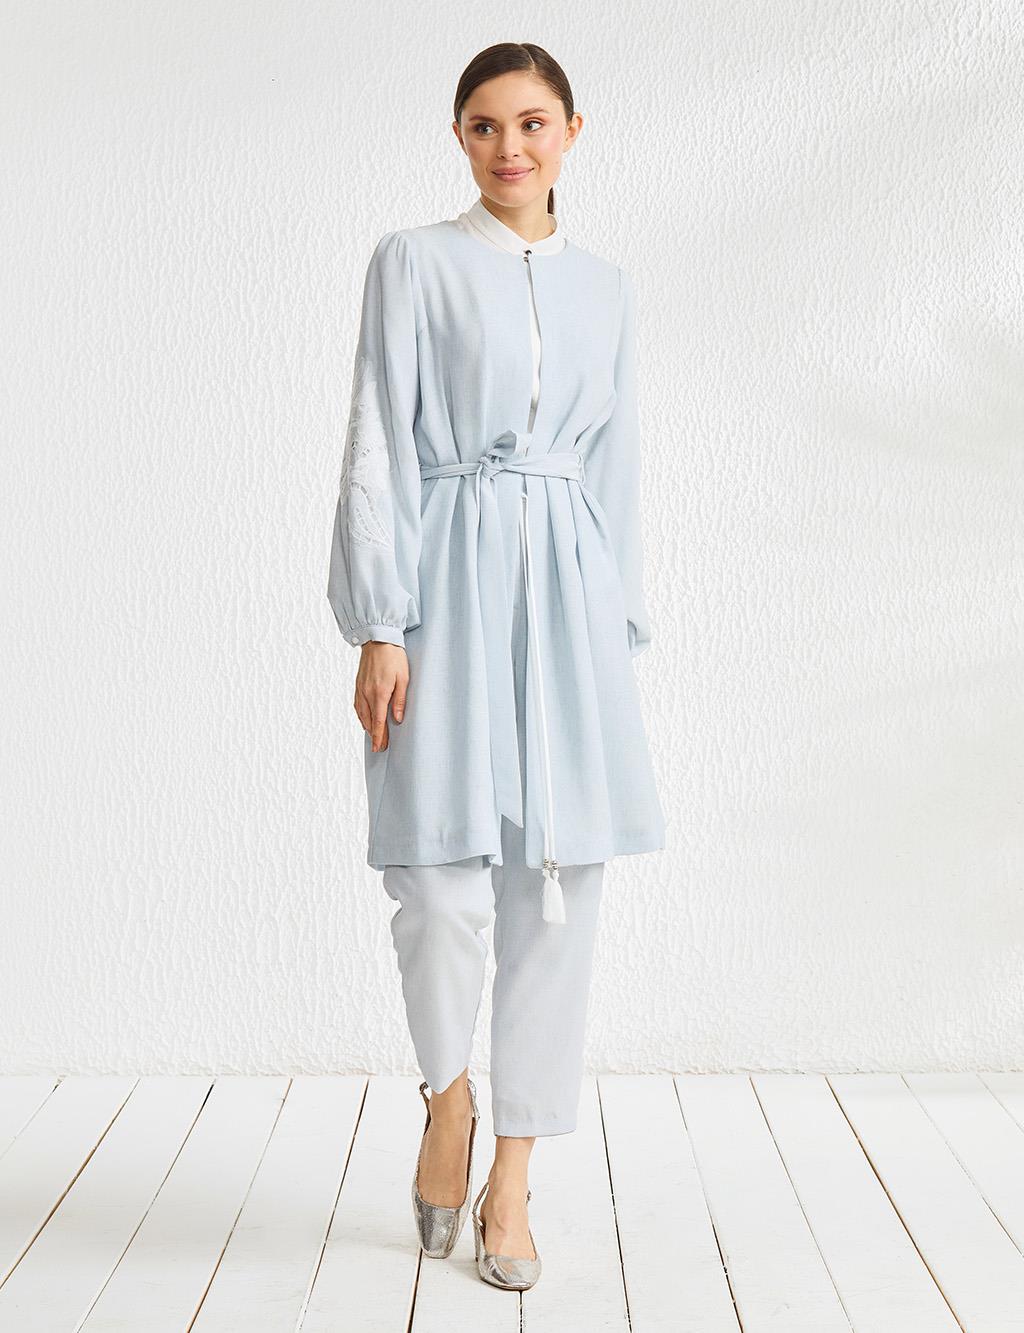 Embroidered Arm Binary Suit Light Blue